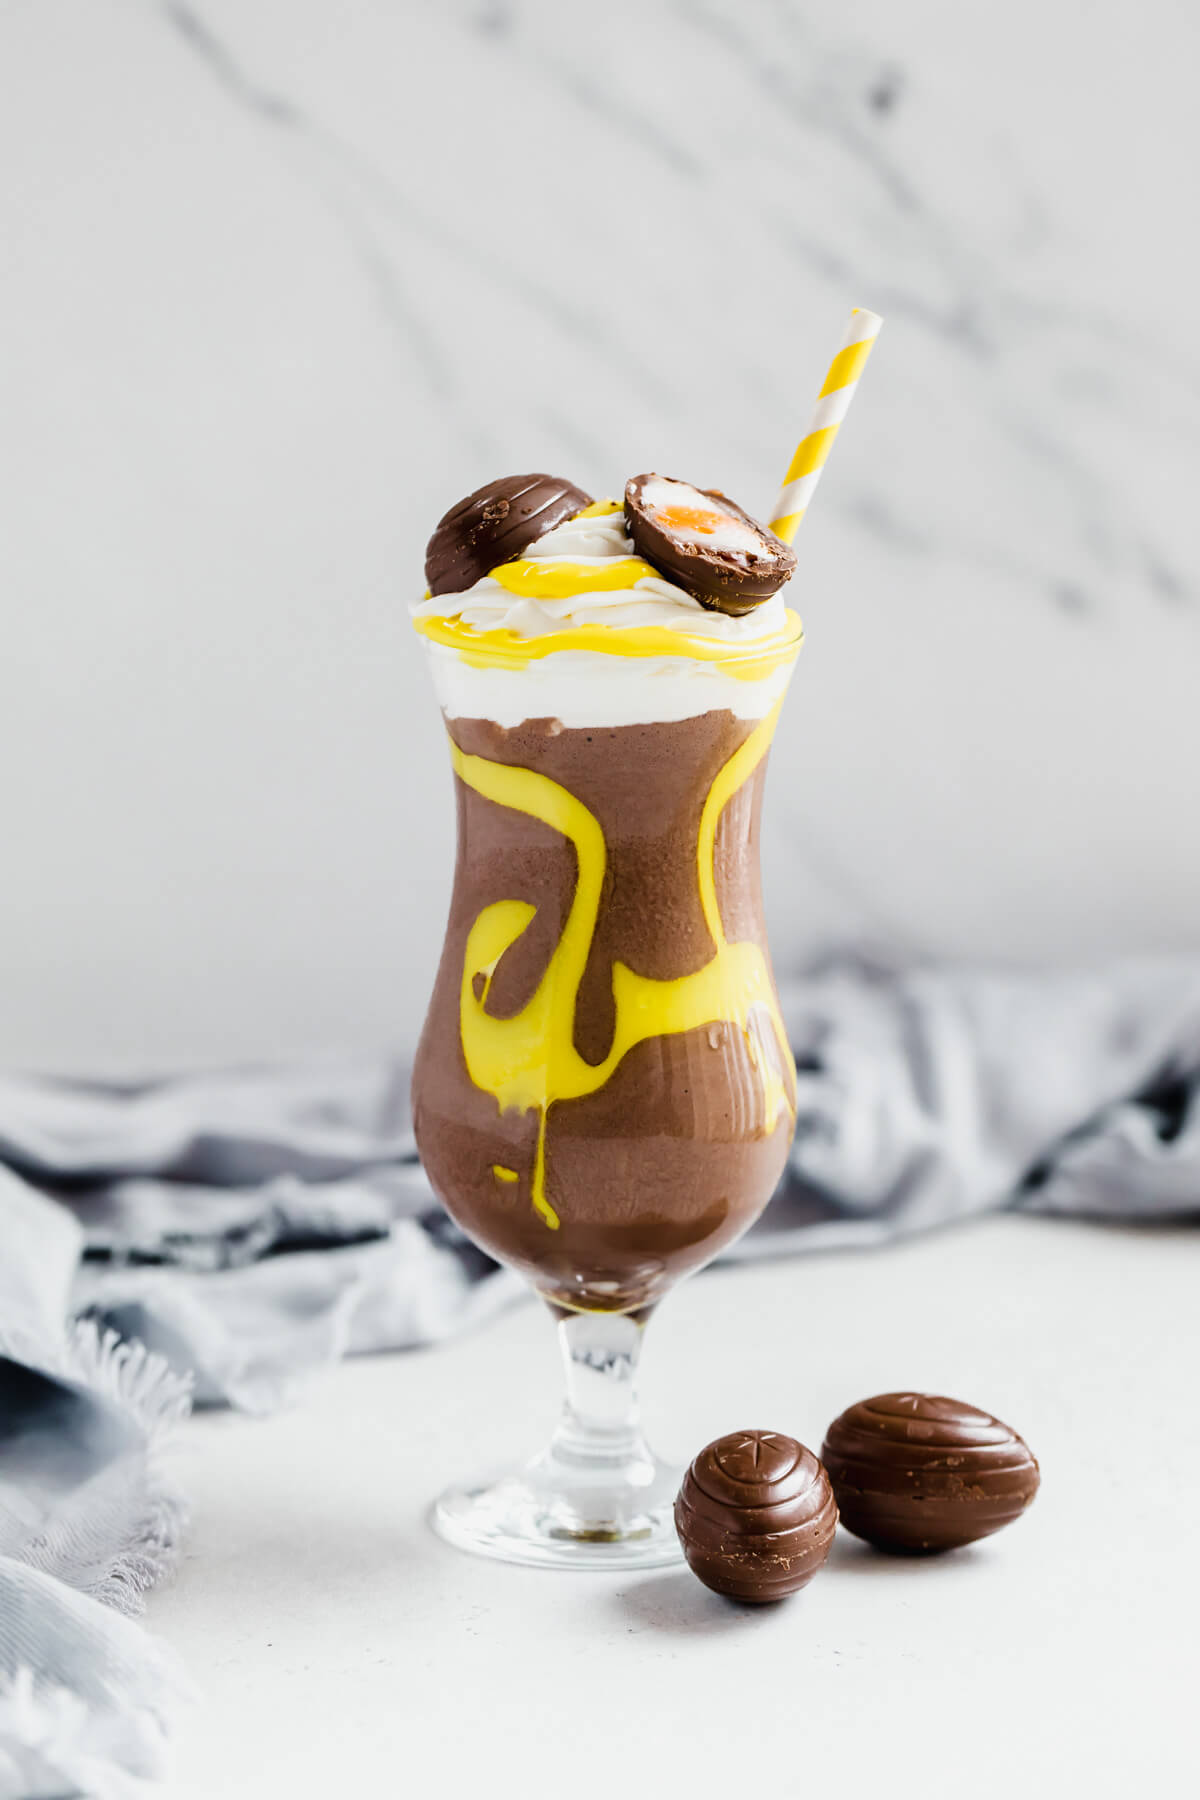 one glass of creme egg flavoured milkshake with two creme egg chocolates on the side